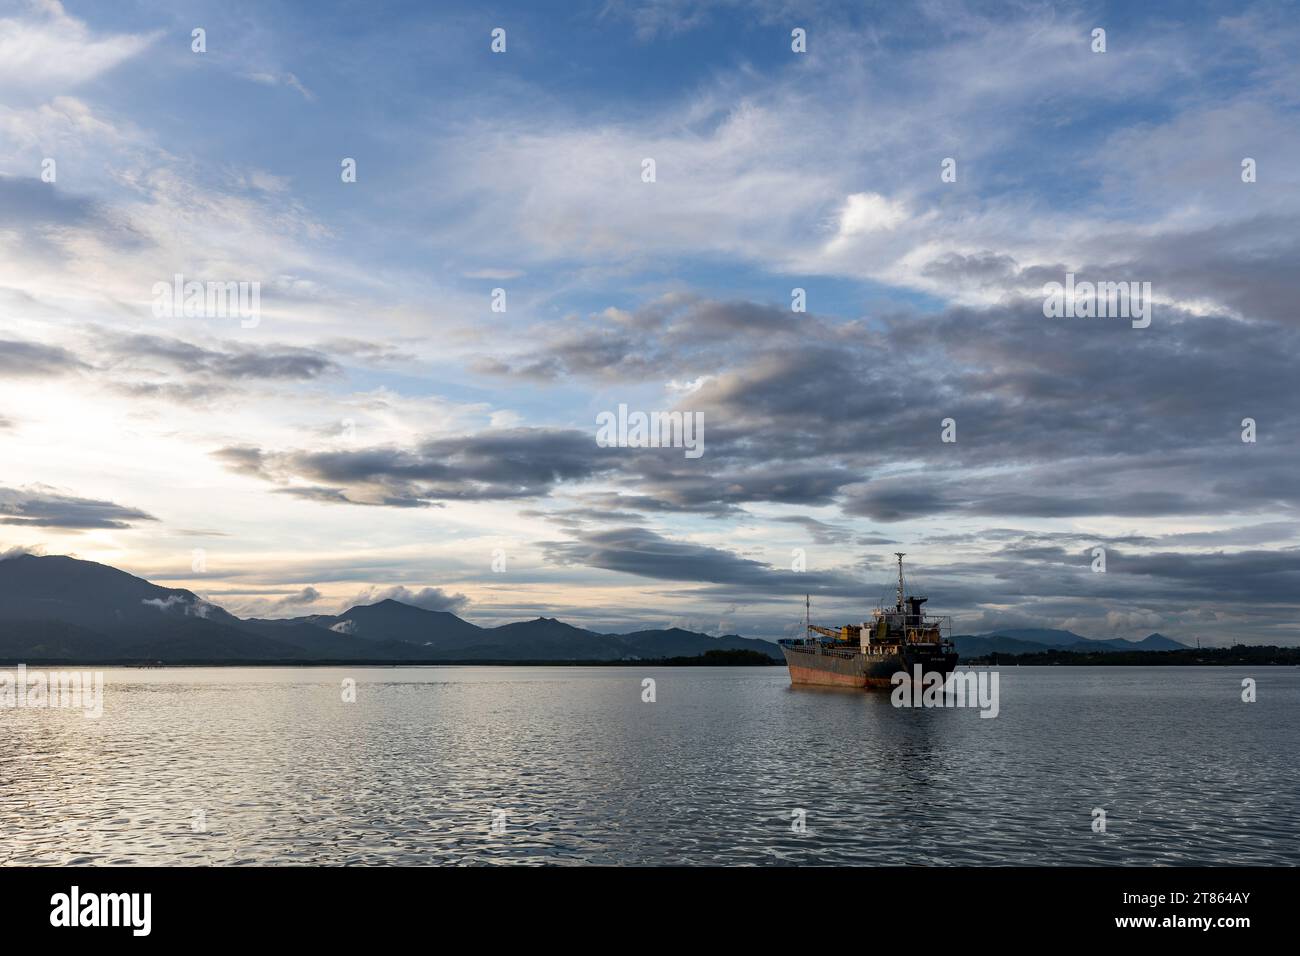 Old rusting cargo tanker sits anchored in beautiful remote port surrounded by mountains Stock Photo